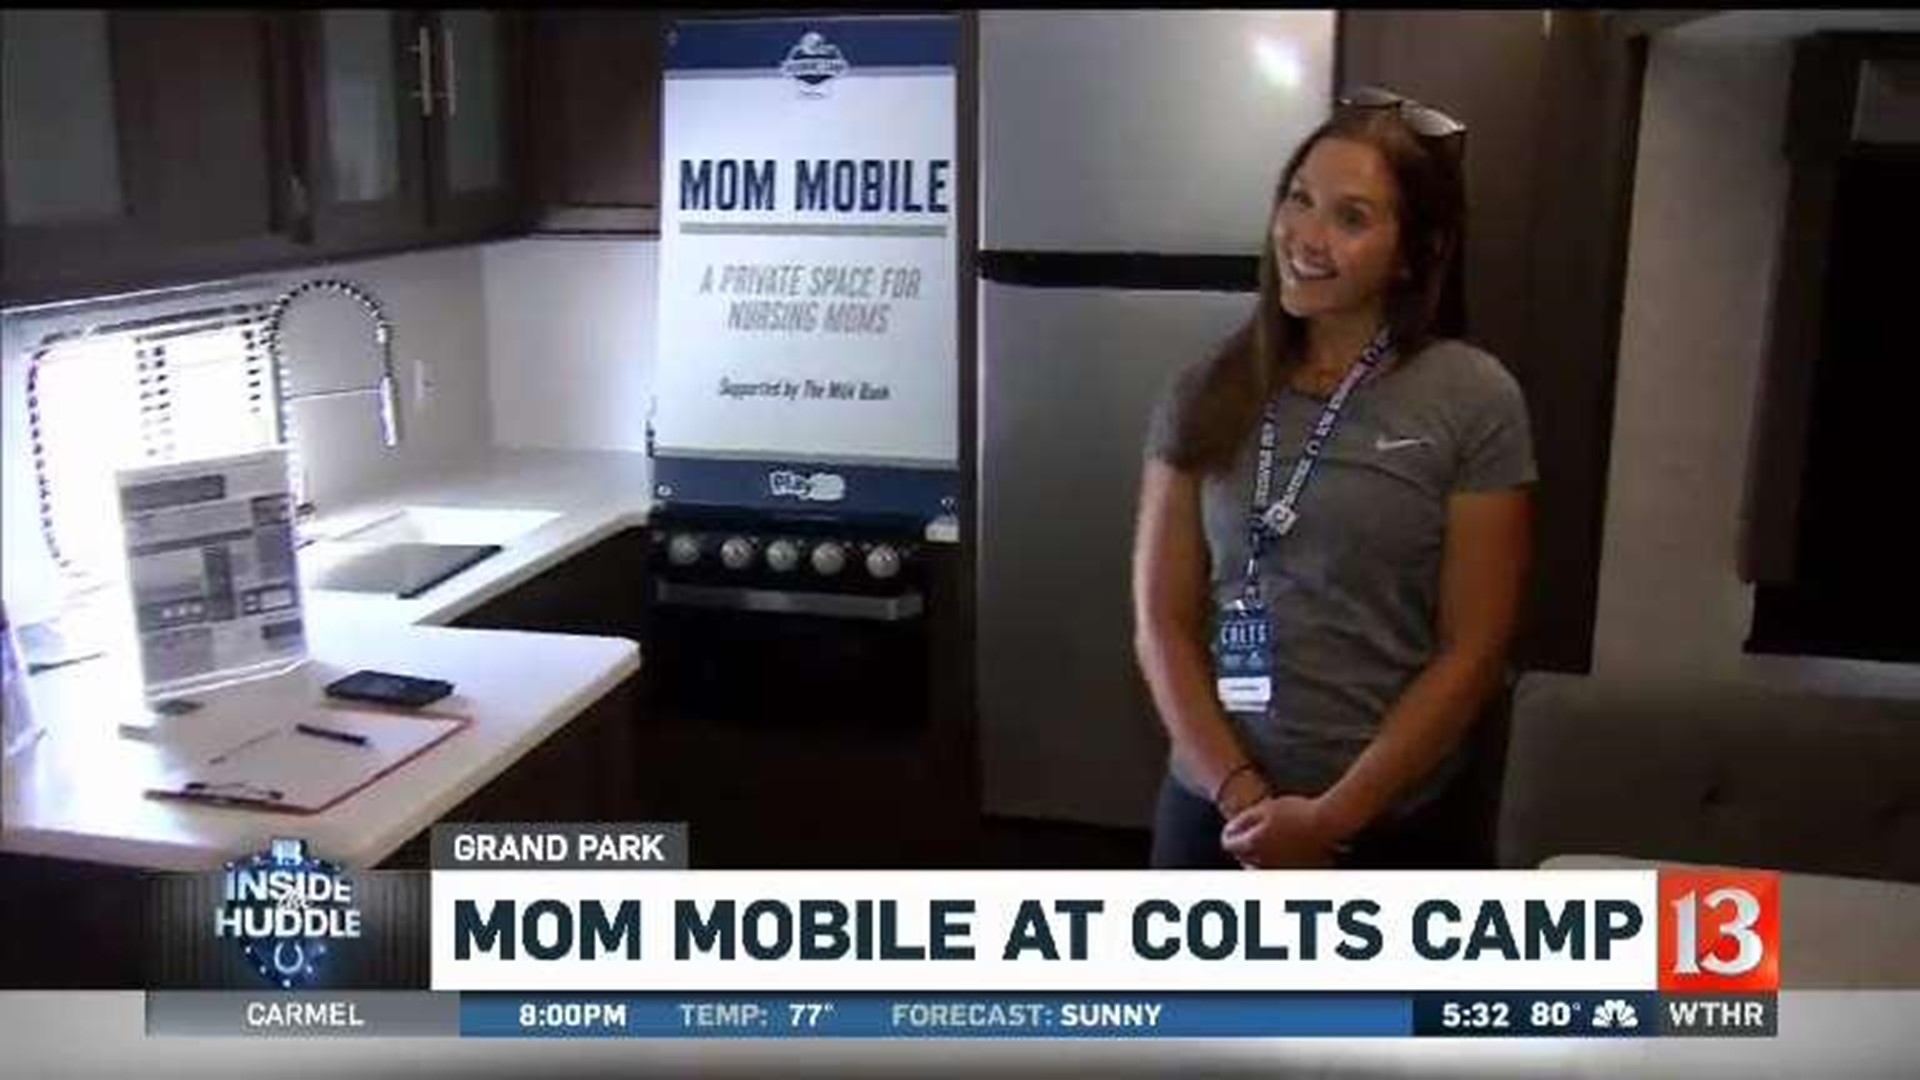 Mom Mobile at Colts Camp;